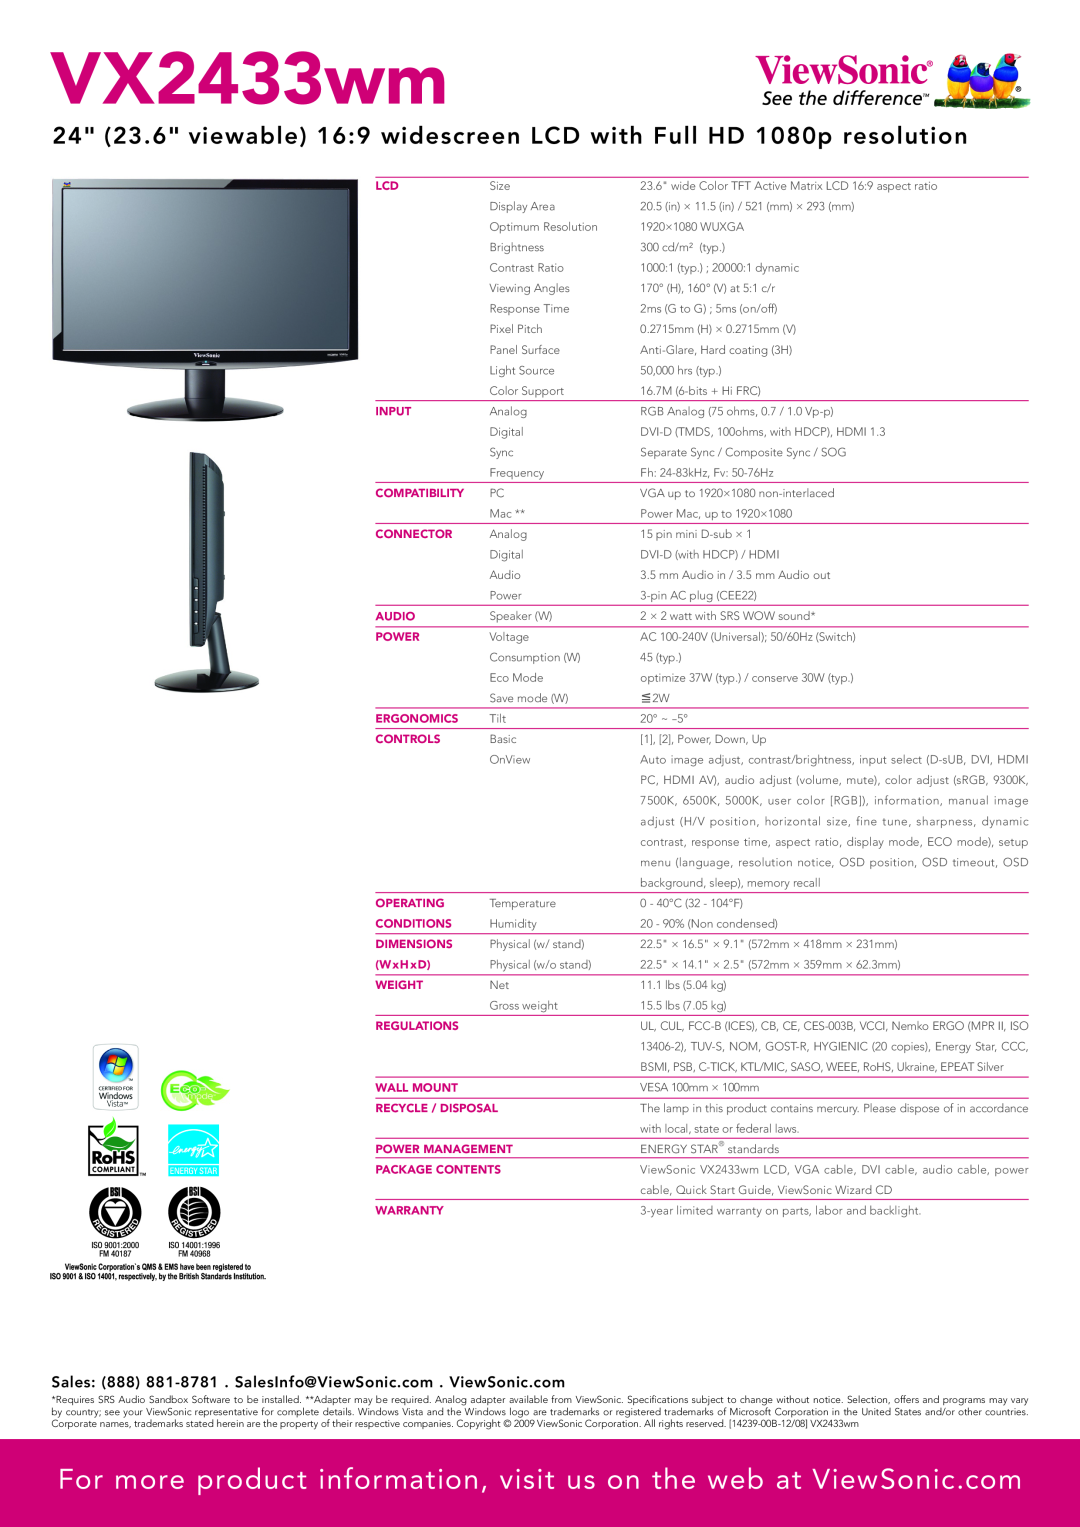 ViewSonic VX2433wm manual For more product information, visit us on the web at ViewSonic.com 